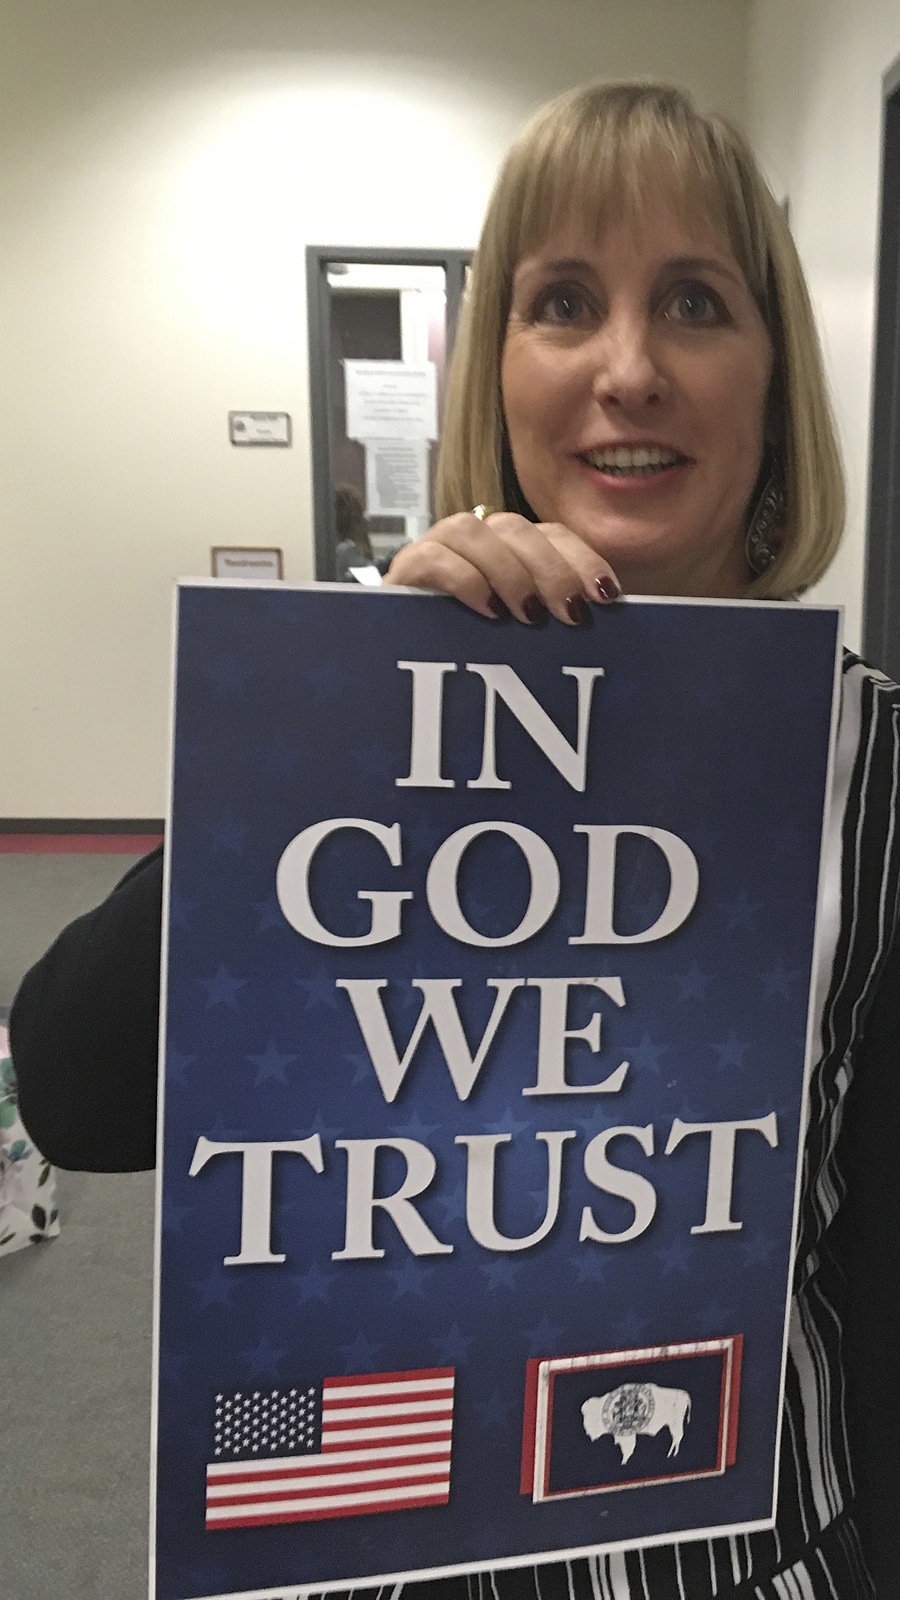 Wyoming State Rep. Cheri Steinmetz,R-Lingle, on March 6, 2018, shows an example of an “In God We Trust” placard in Cheyenne, Wyo. Steinmetz sponsored a bill that would allow people to donate such placards for display in prominent places in state buildings and schools. The measure died in the state Senate. (AP Photo by Bob Moen)